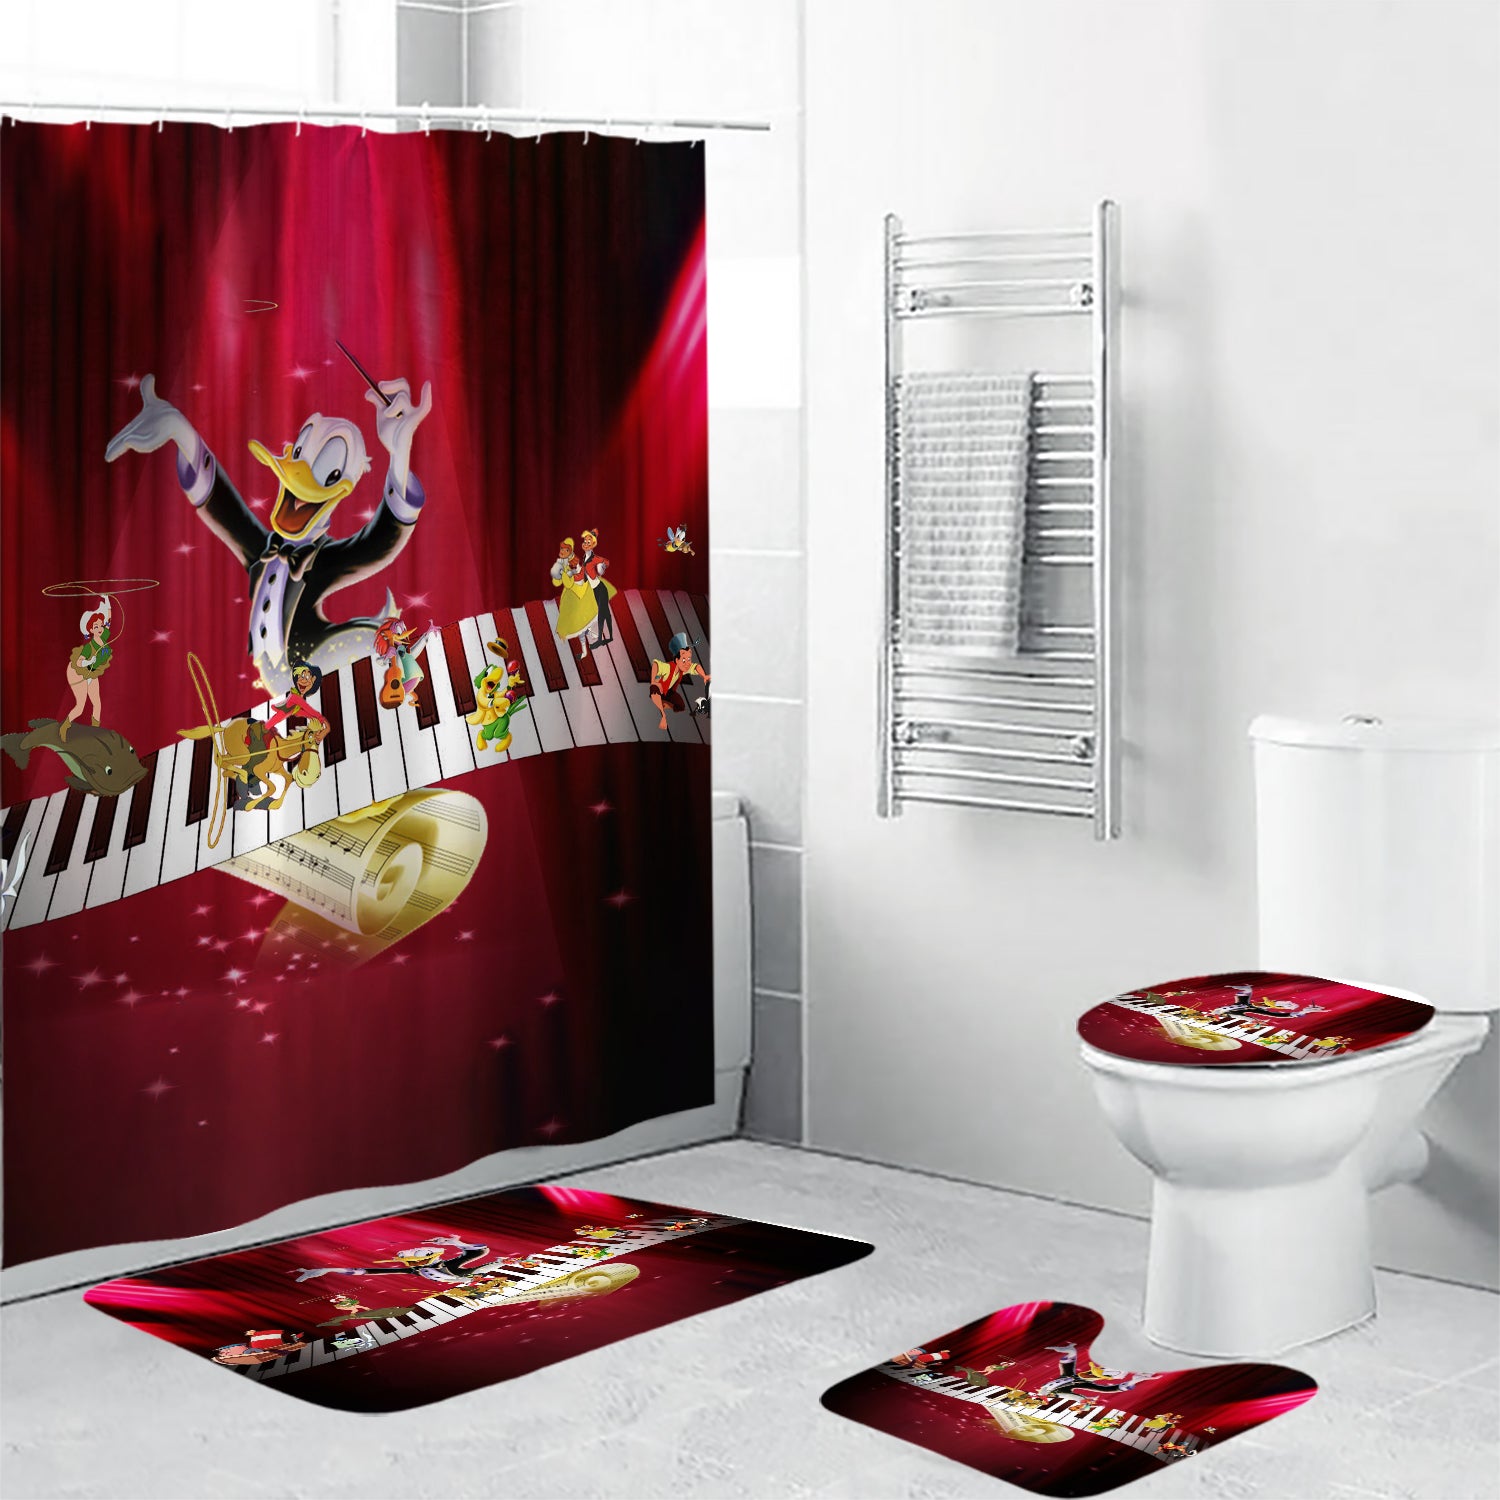 Melody Time Poster 3 4PCS Shower Curtain Non-Slip Toilet Lid Cover Bath Mat - Bathroom Set Fans Gifts